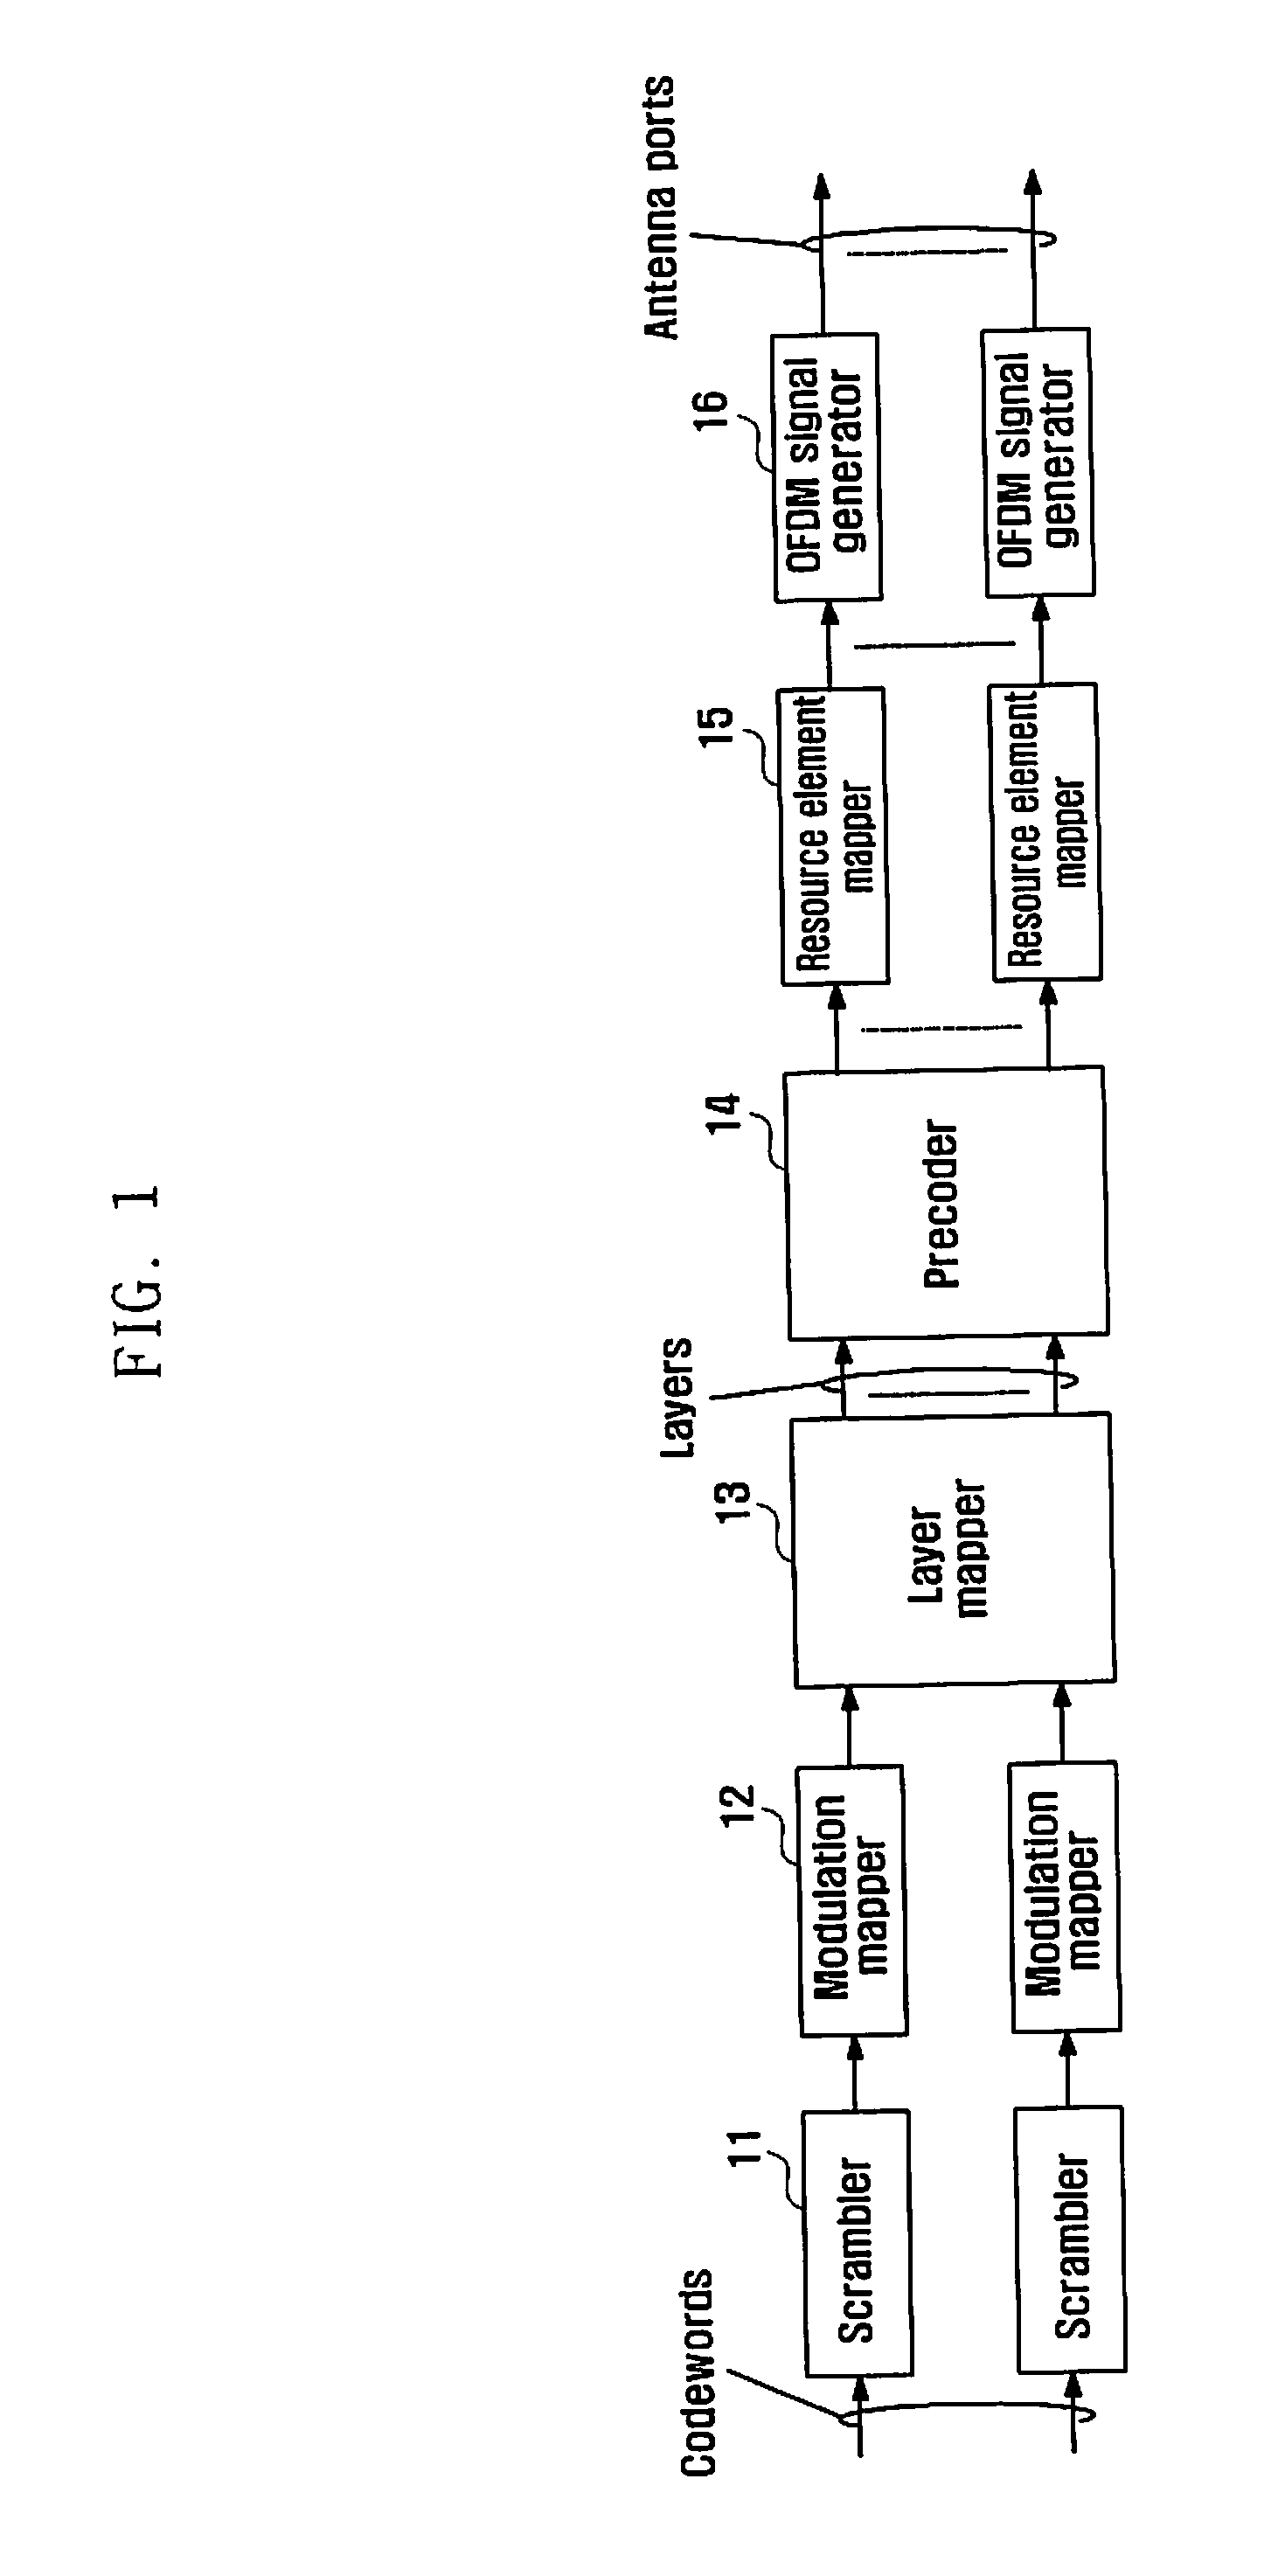 Method and apparatus for transmitting/receiving csi-rs in massive MIMO system operating in fdd mode